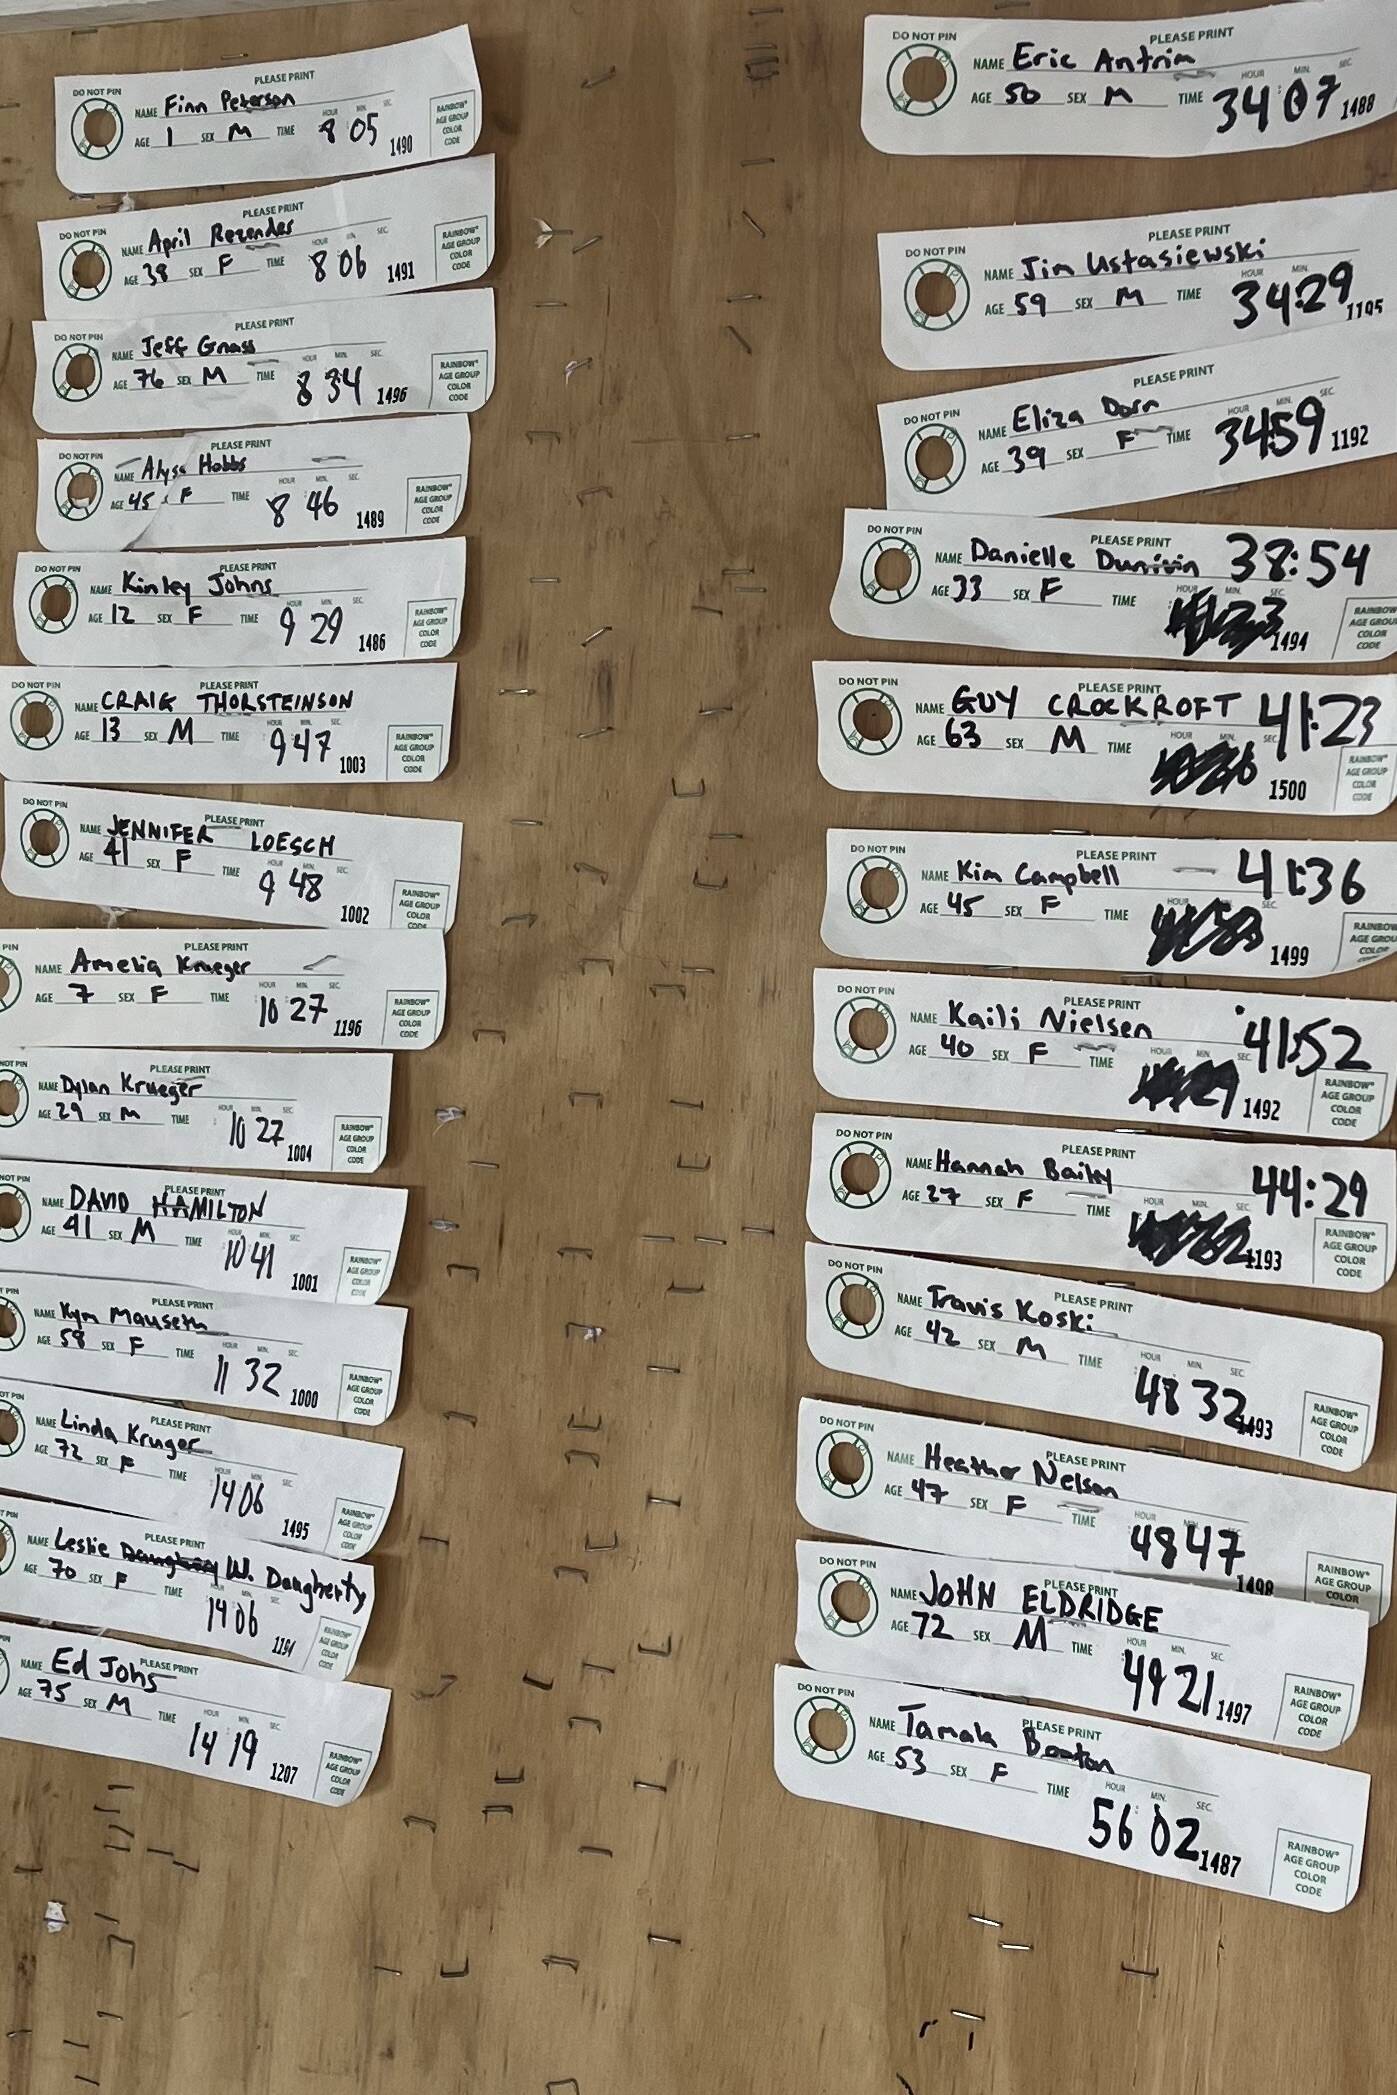 Racer’s tickets stabled to the board displays each person’s finish time in order on Saturday at Savikko Park for this year’s Flanagan’s Run, hosted by the Juneau Trail and Road Runners. (Jonson Kuhn / Juneau Empire)